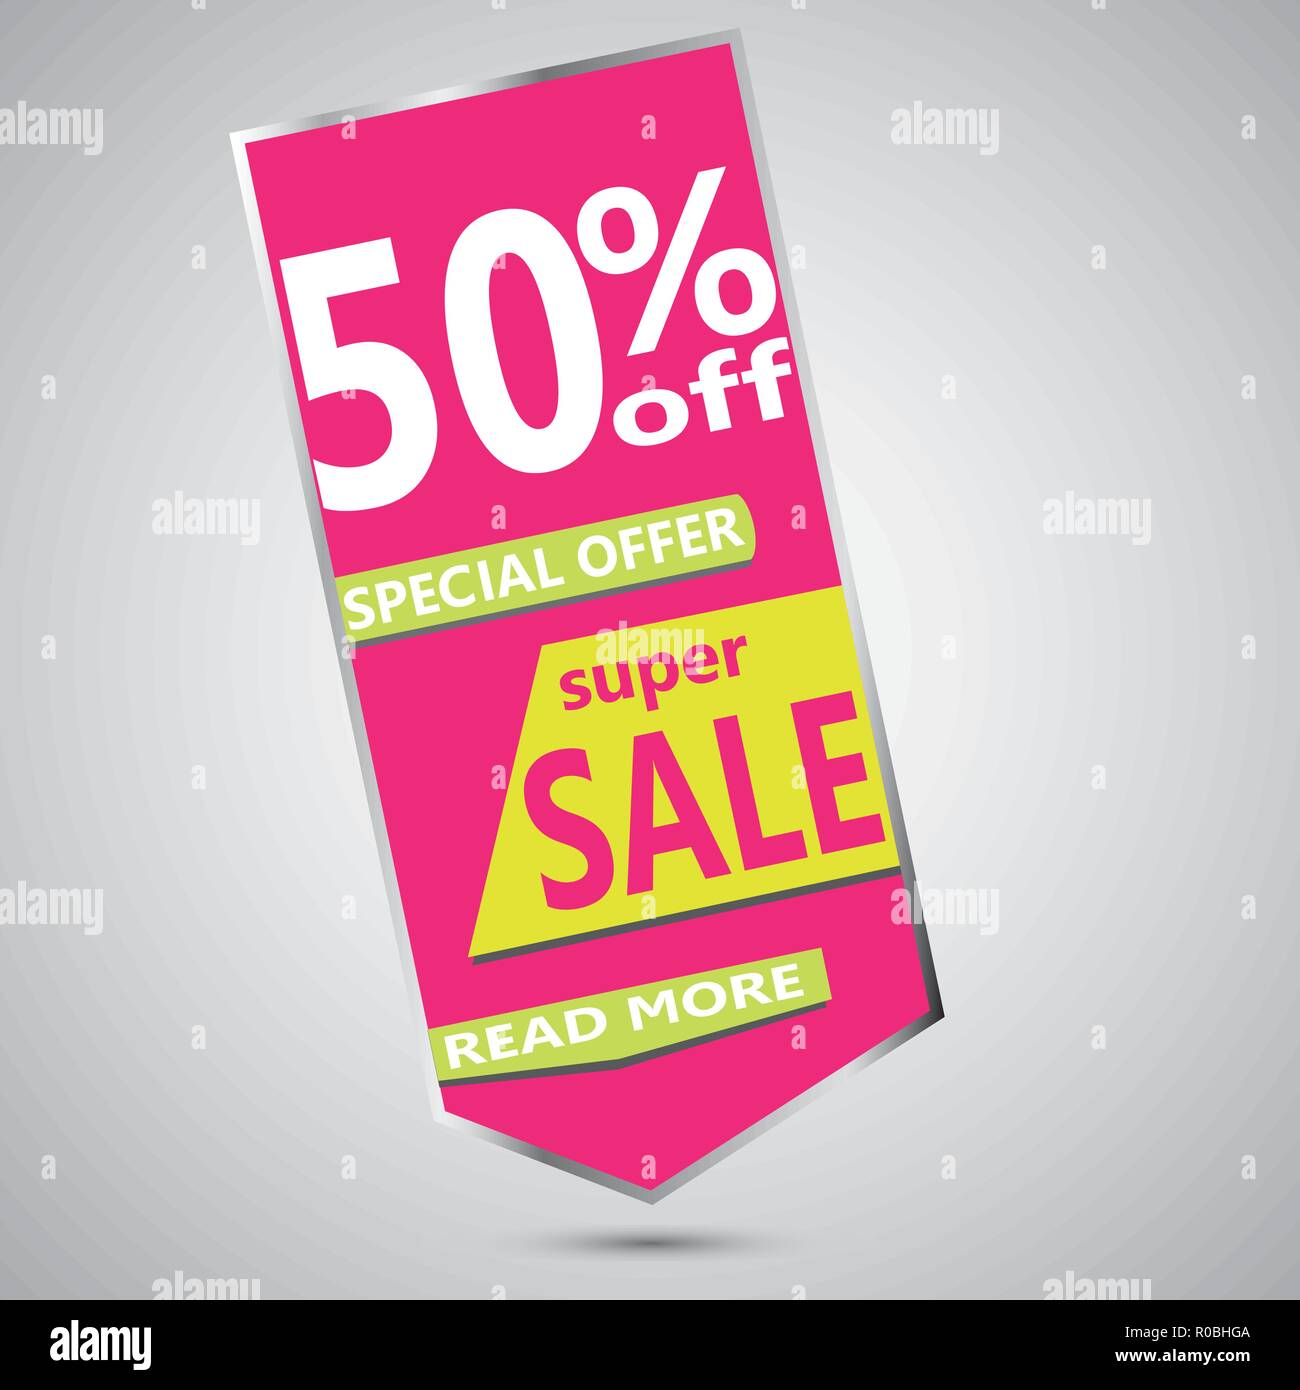 Super Sale for clearance at 23 off It s a hot deal sale poster a Within Offer Flyer Template